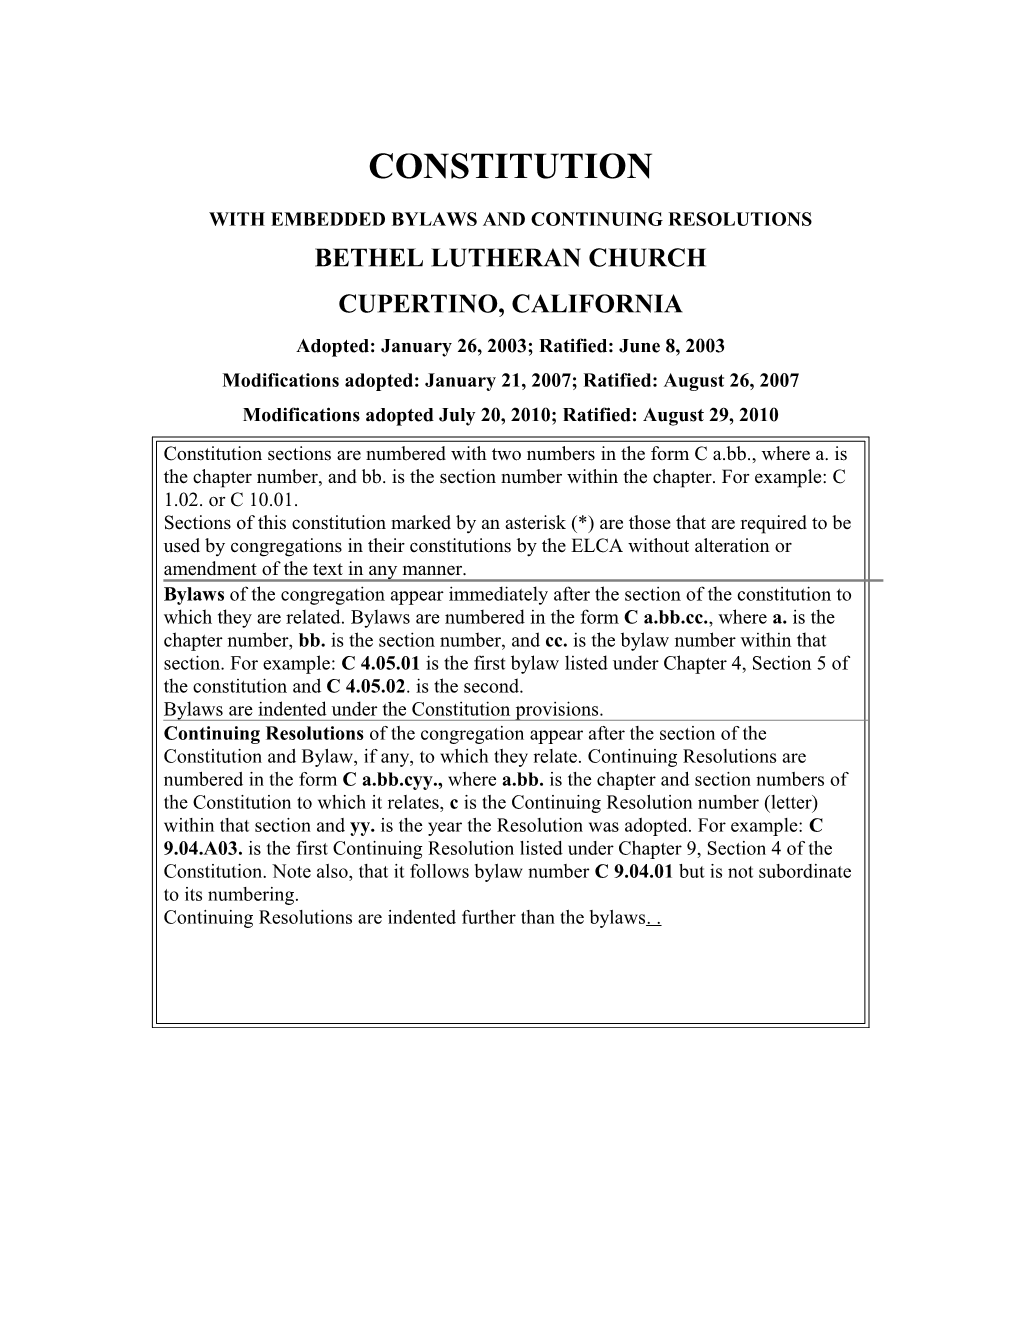 Constitution, Bylaws, and Continuing Resolutions